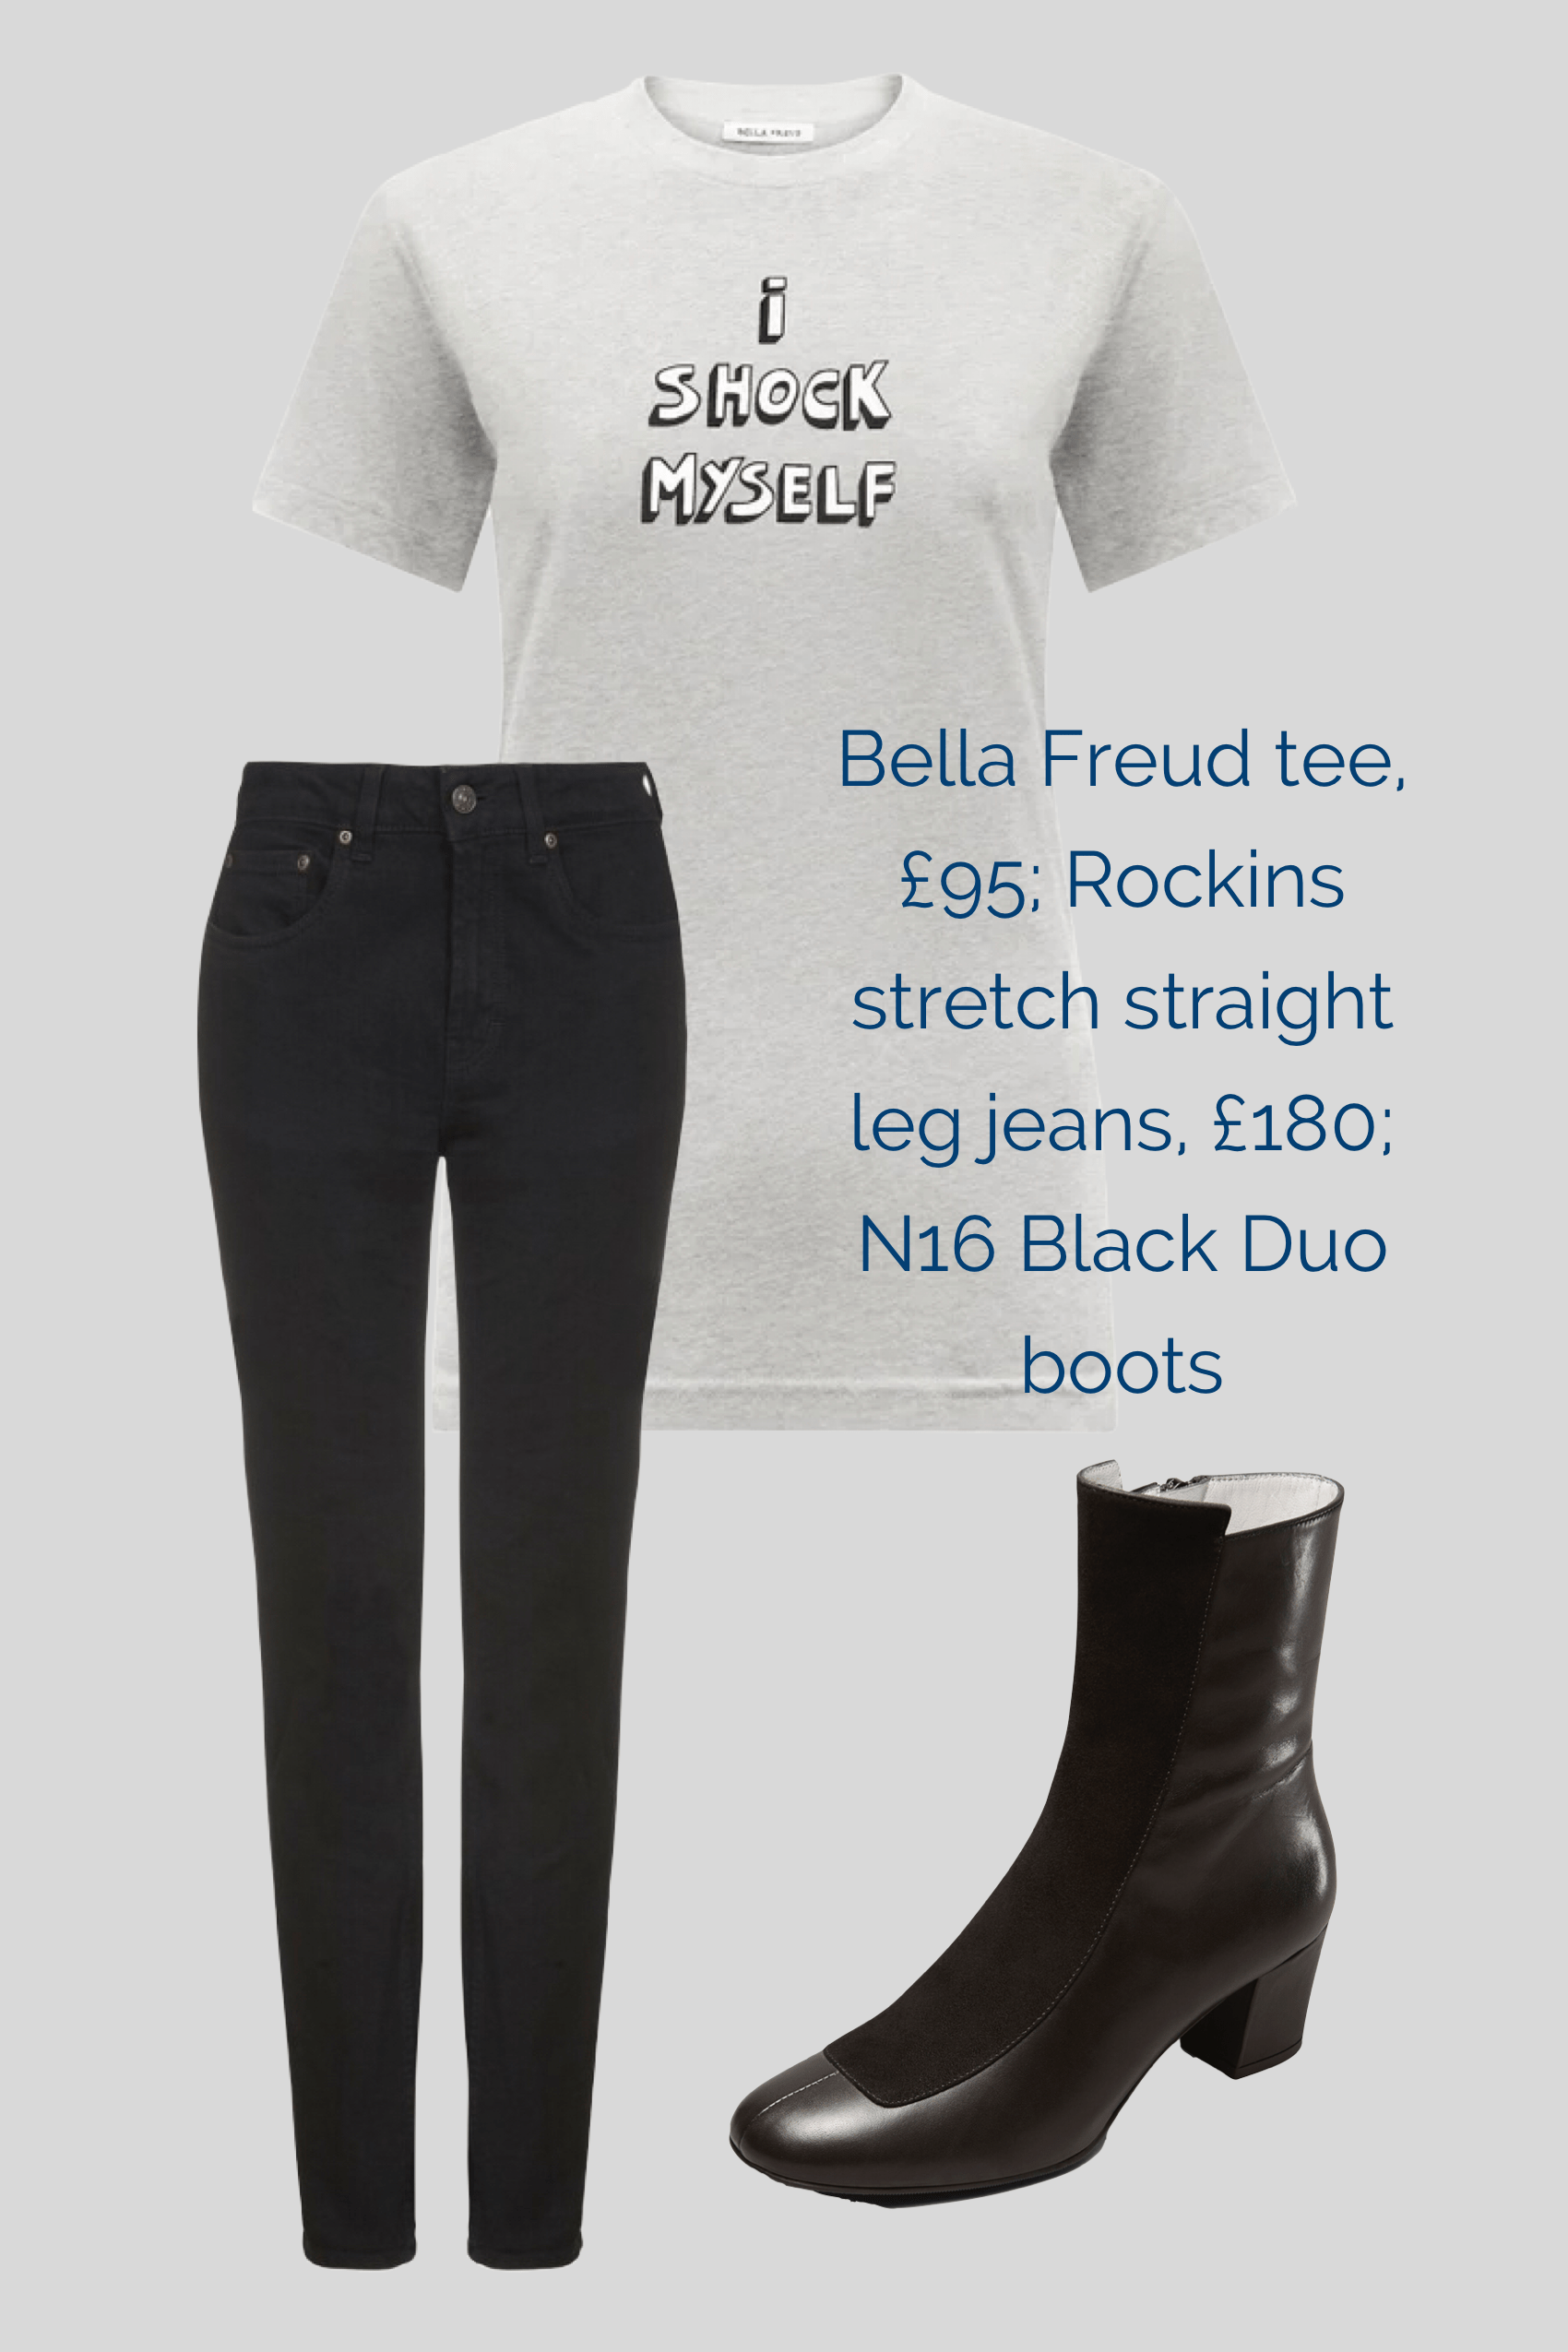 No16 Black Duo paired with Rockins jeans and Bella Freud T-shirt